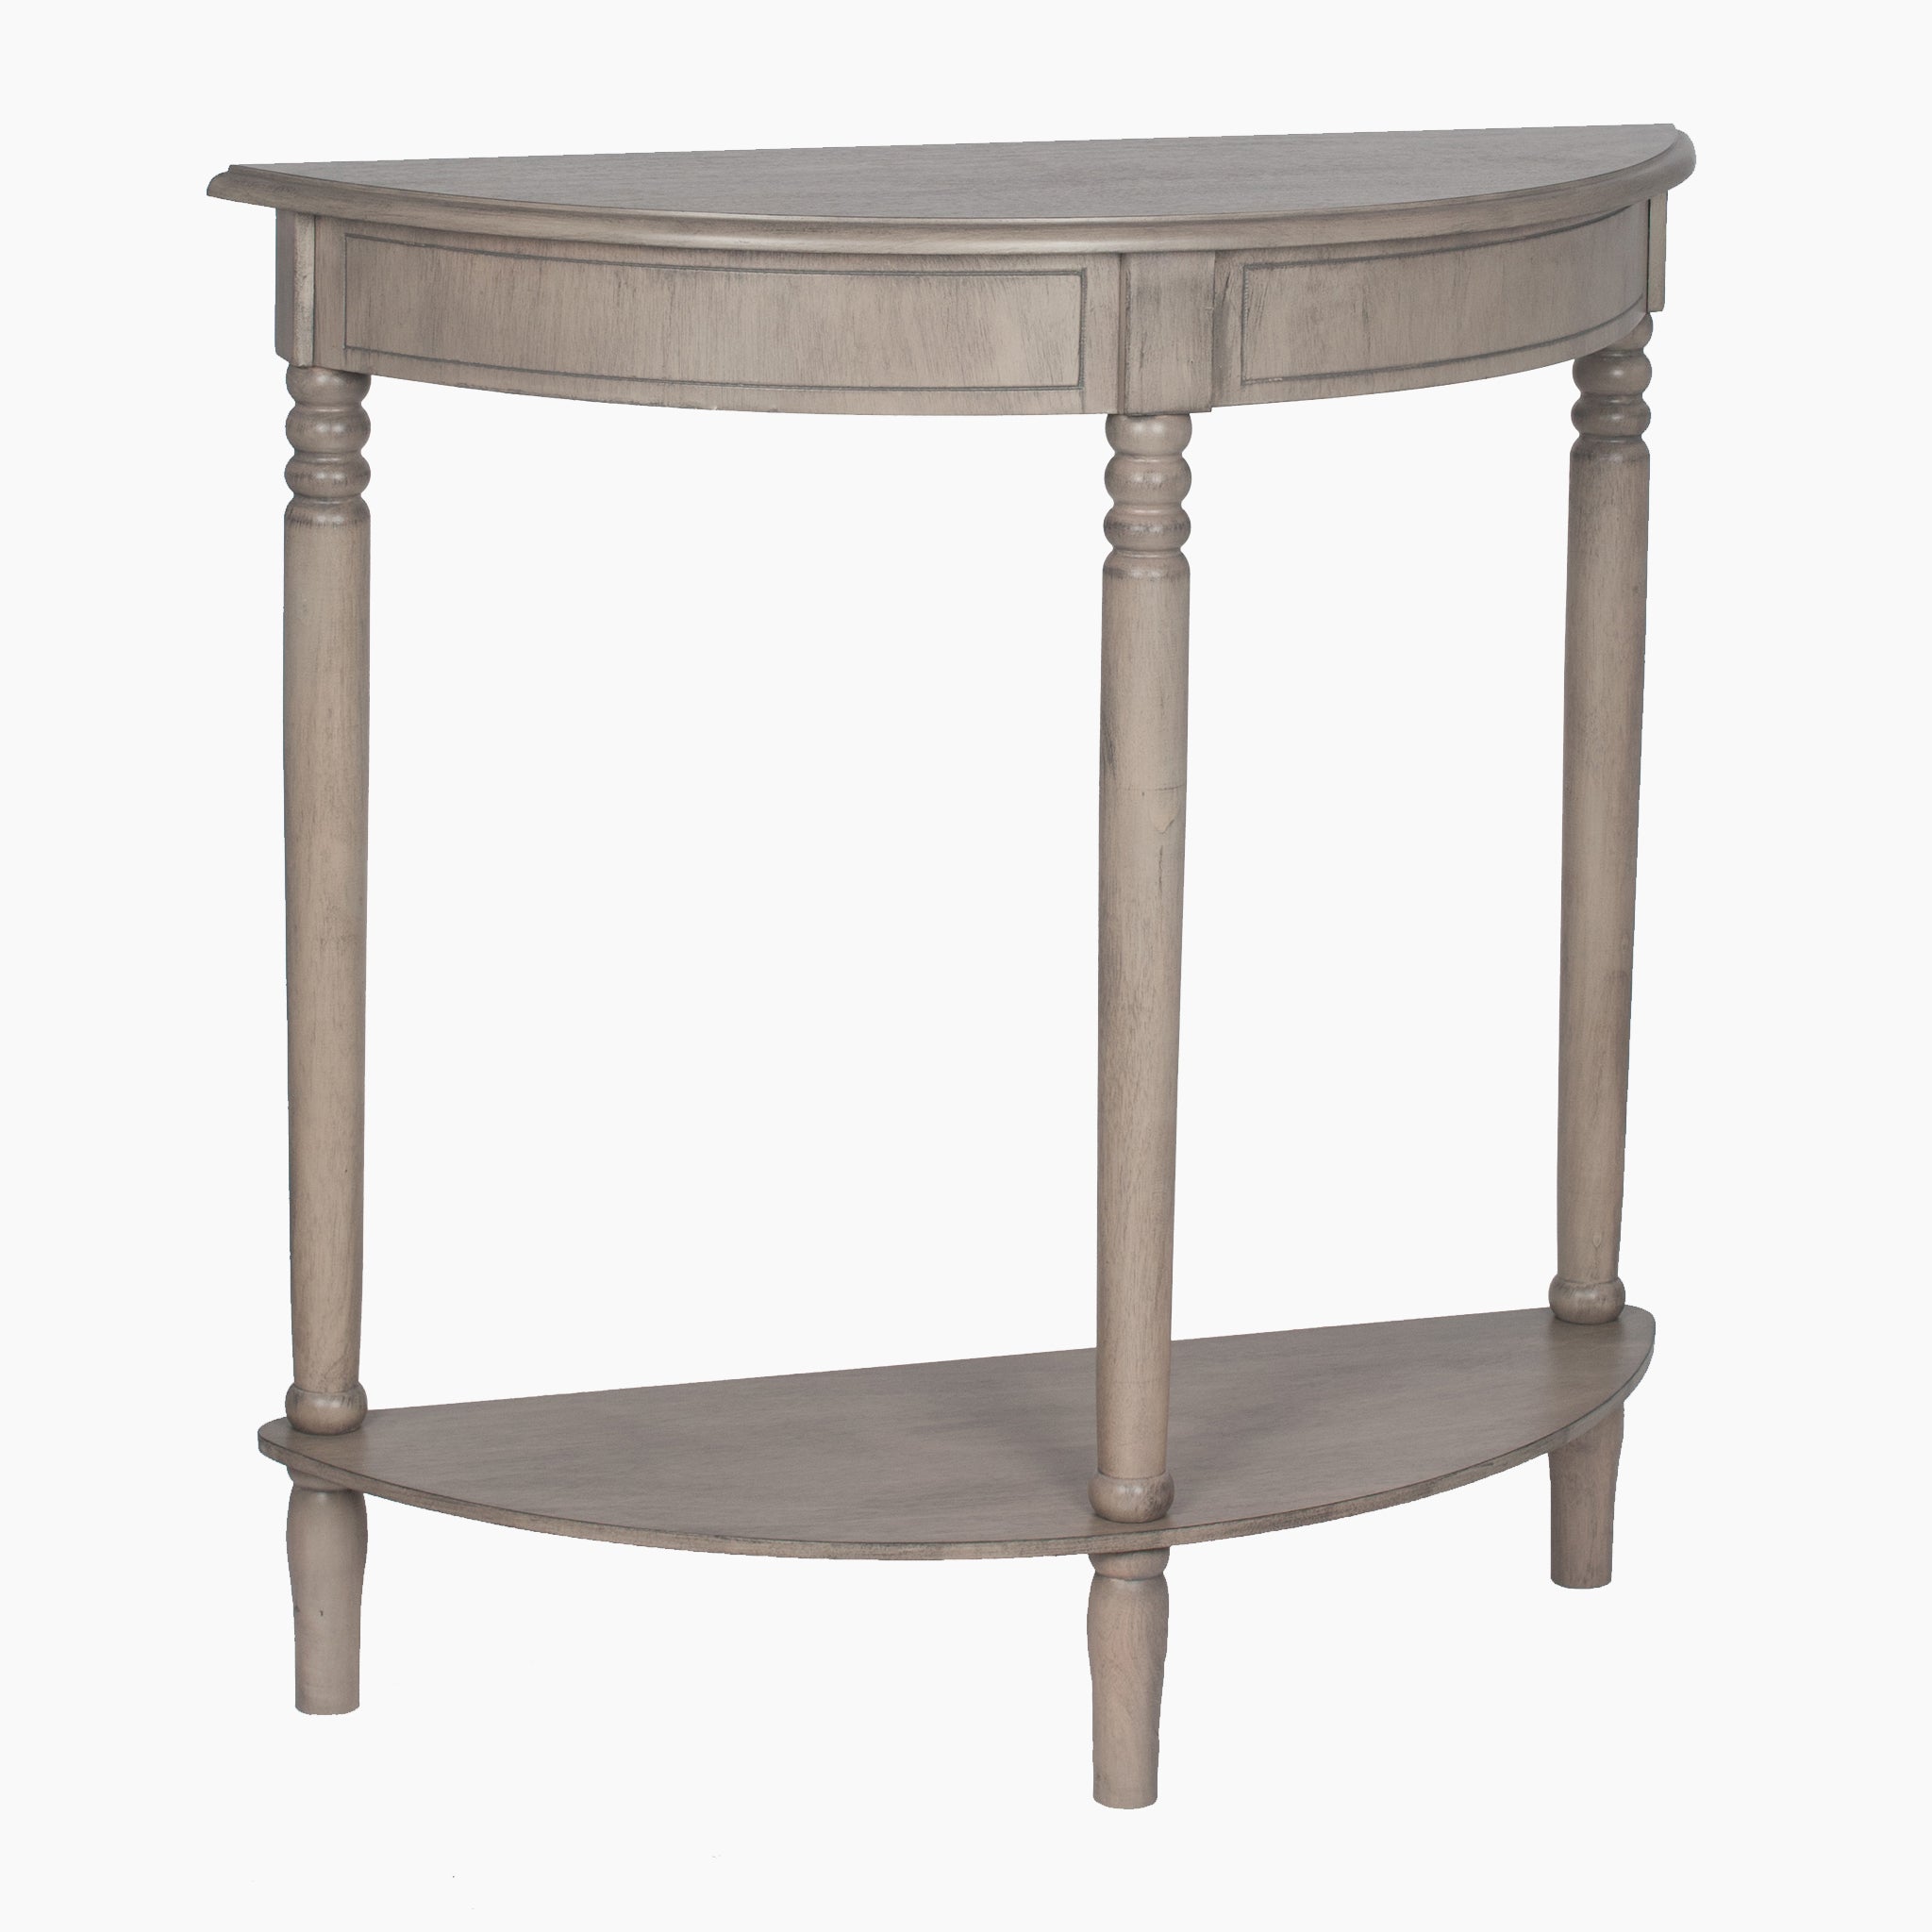 Ashwell Taupe Pine Wood Half Moon Console Table